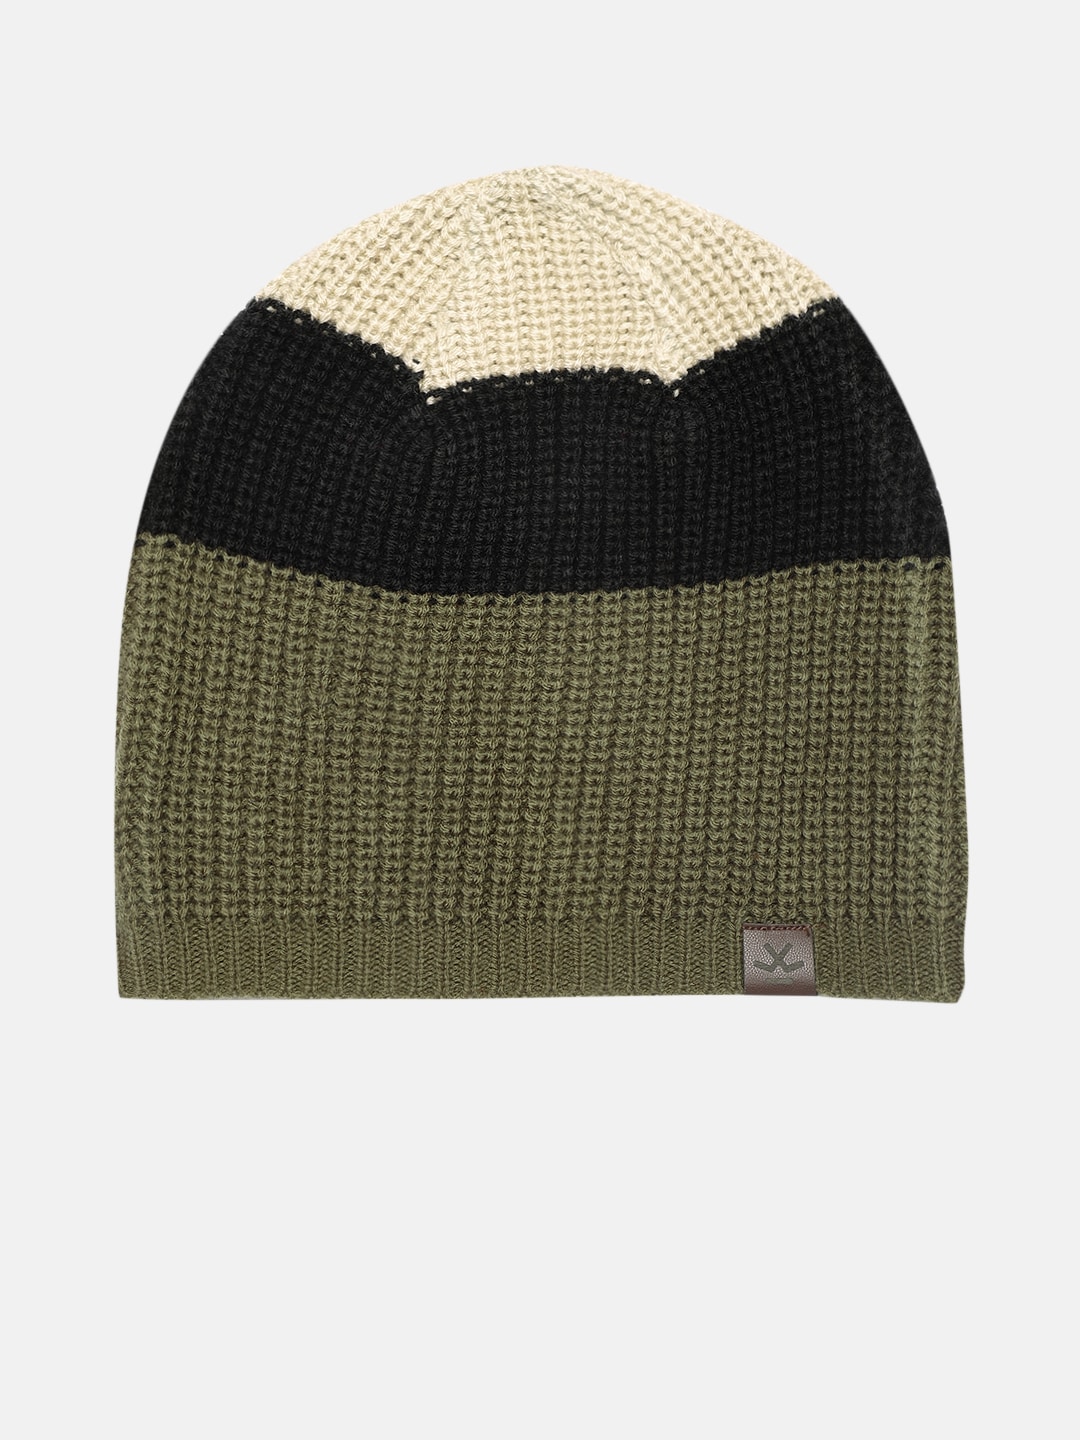 WROGN Unisex Olive Green & Black Colourblocked Acrylic Beanie Price in India